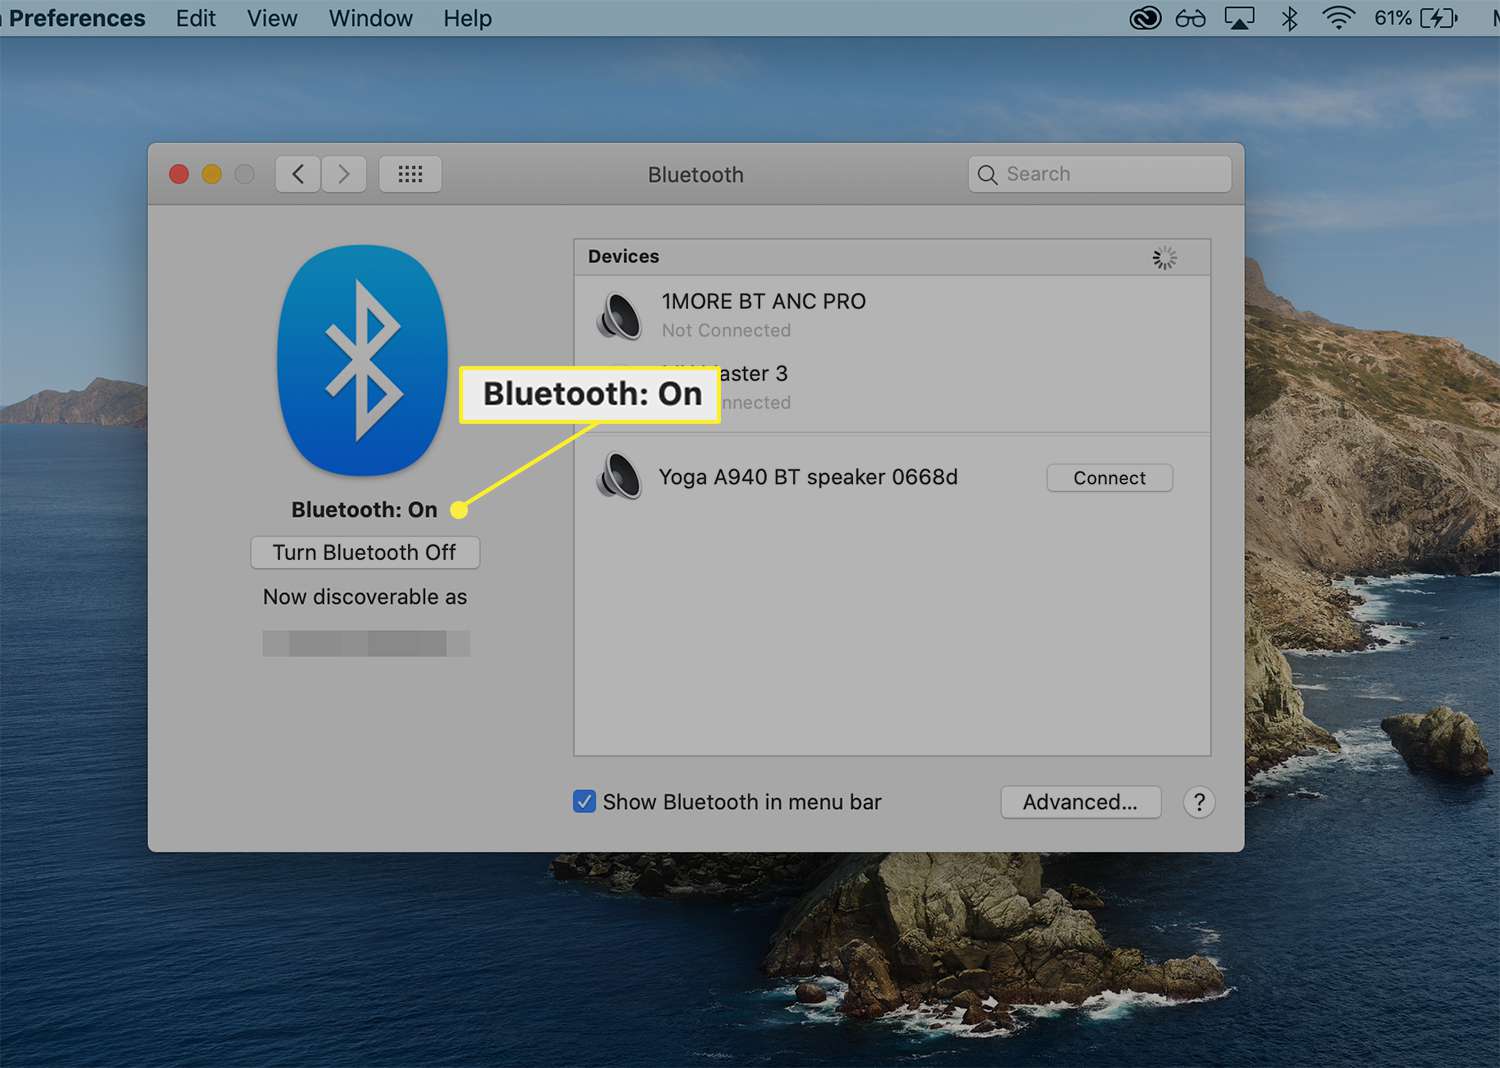 Bluetooth set to on in the macOS Bluetooth preferences dialog box